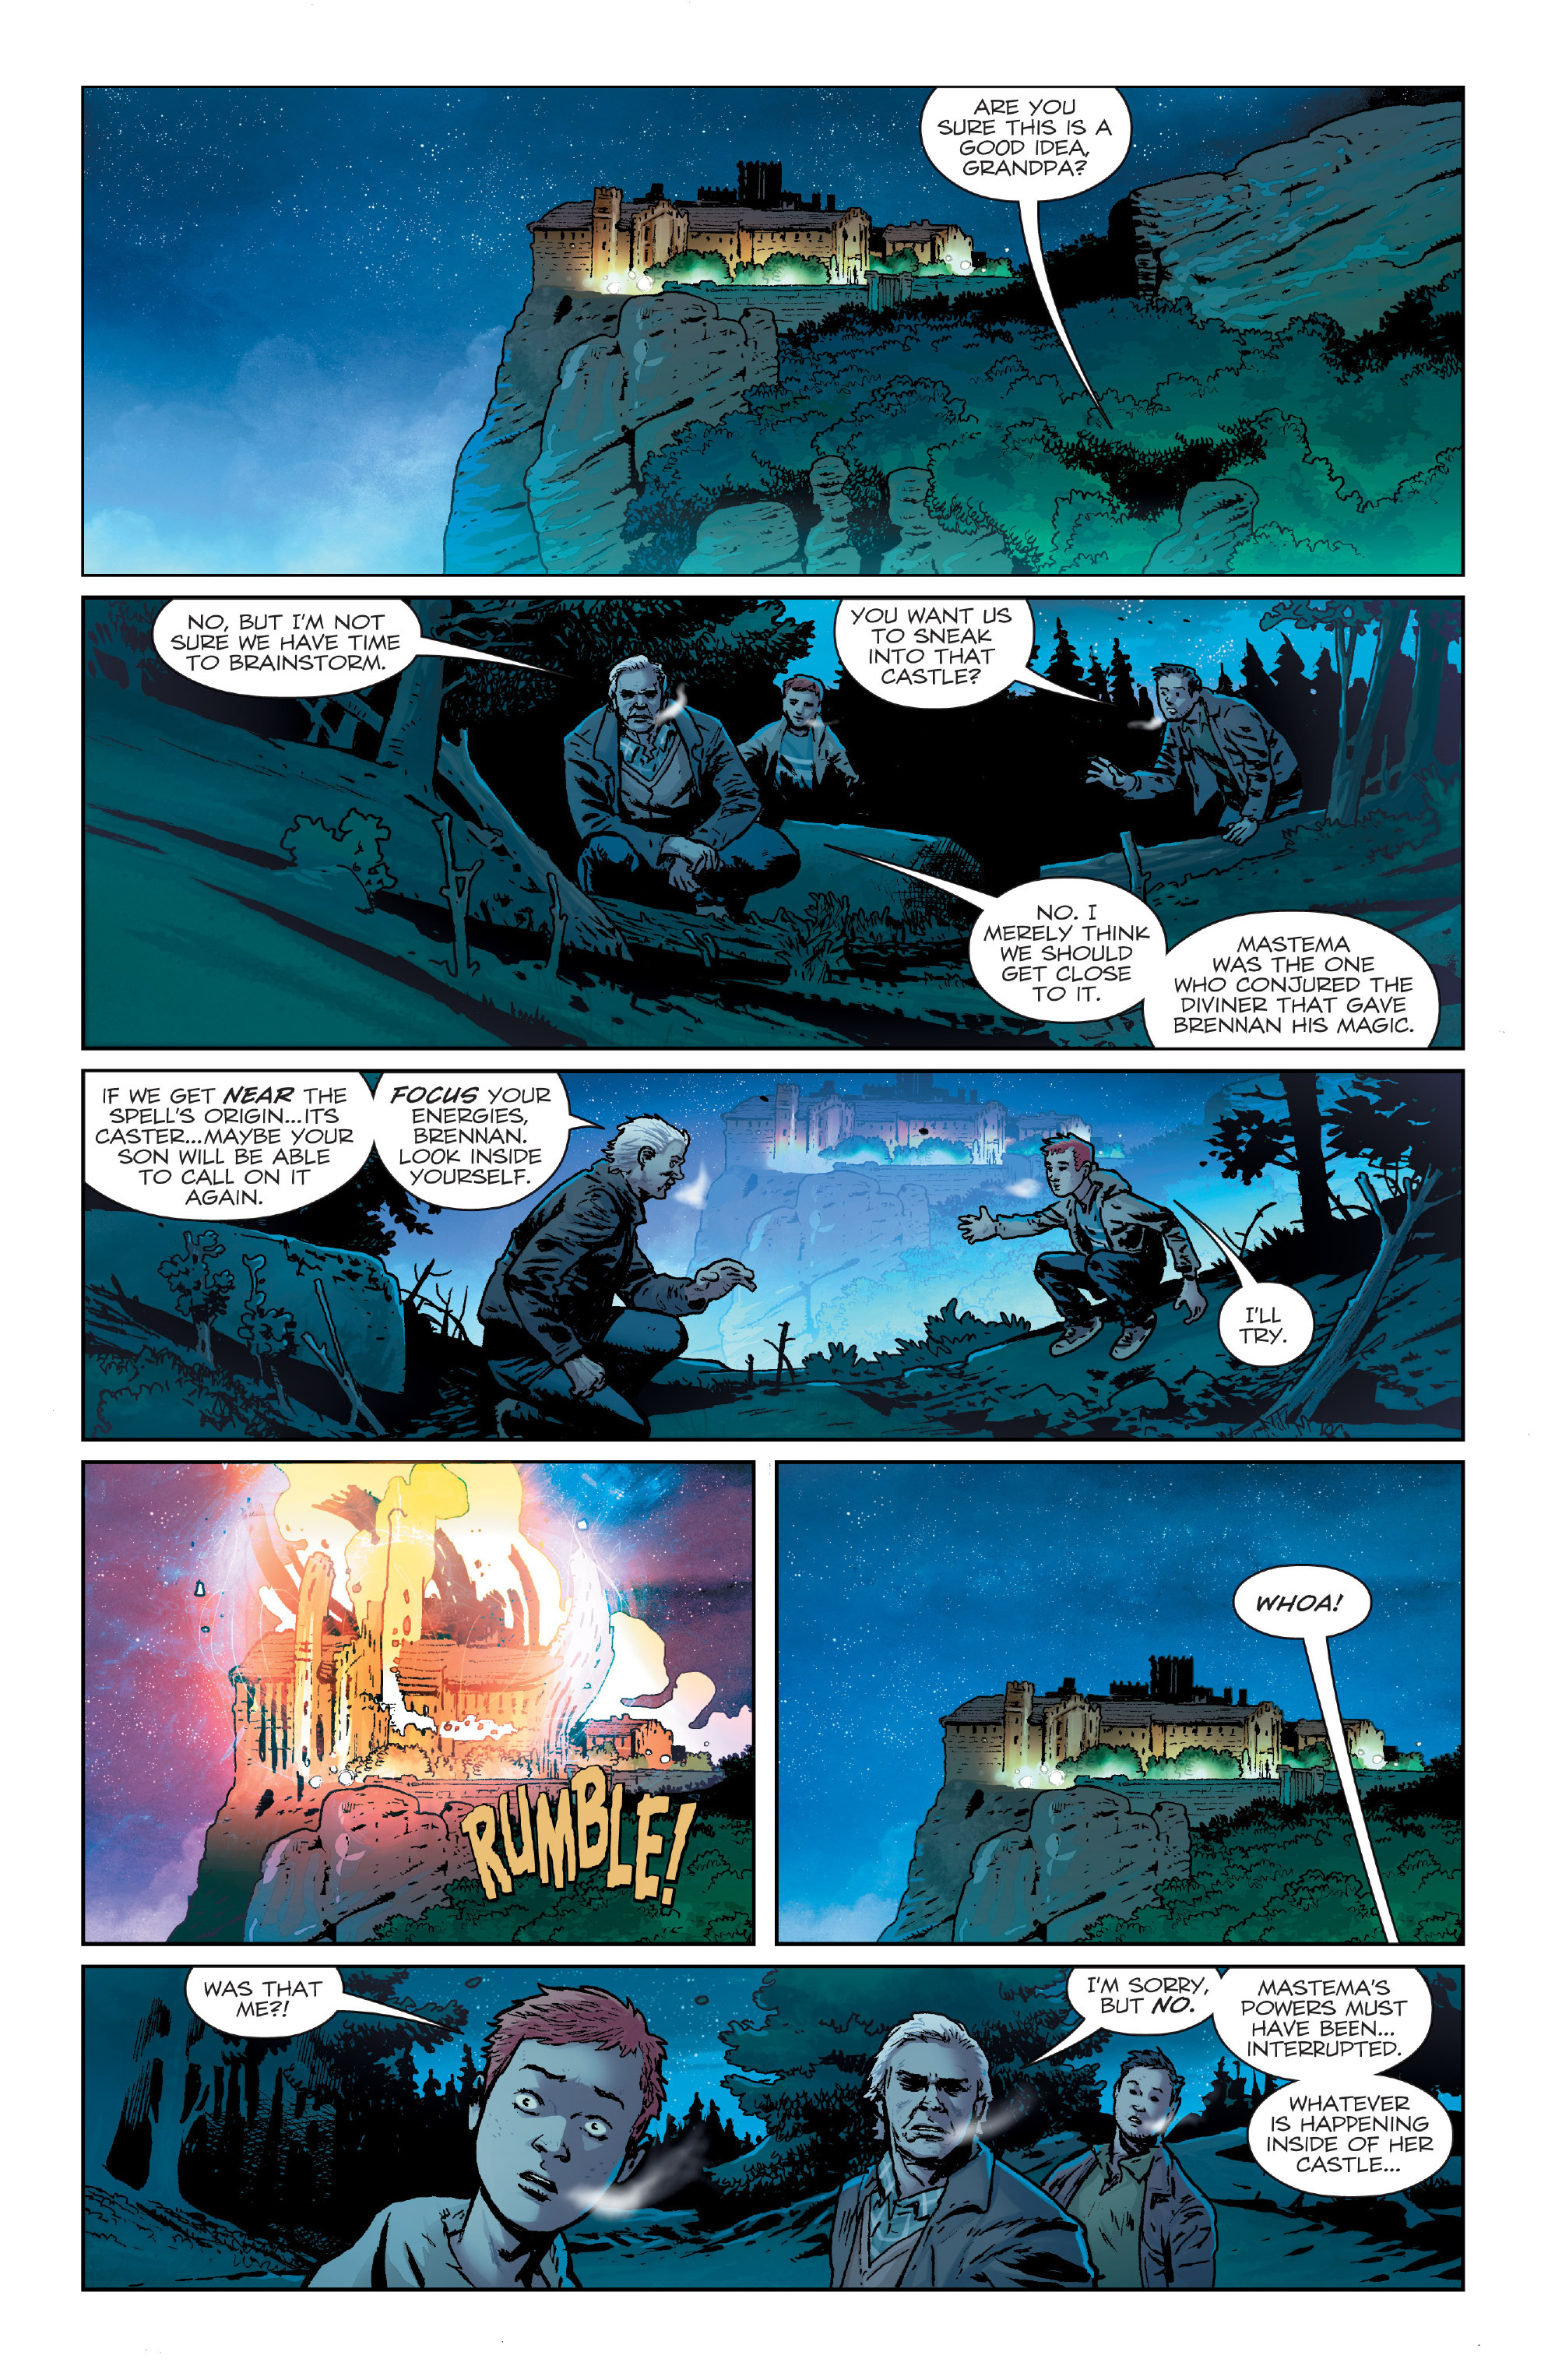 Birthright (2014-): Chapter 24 - Page 3